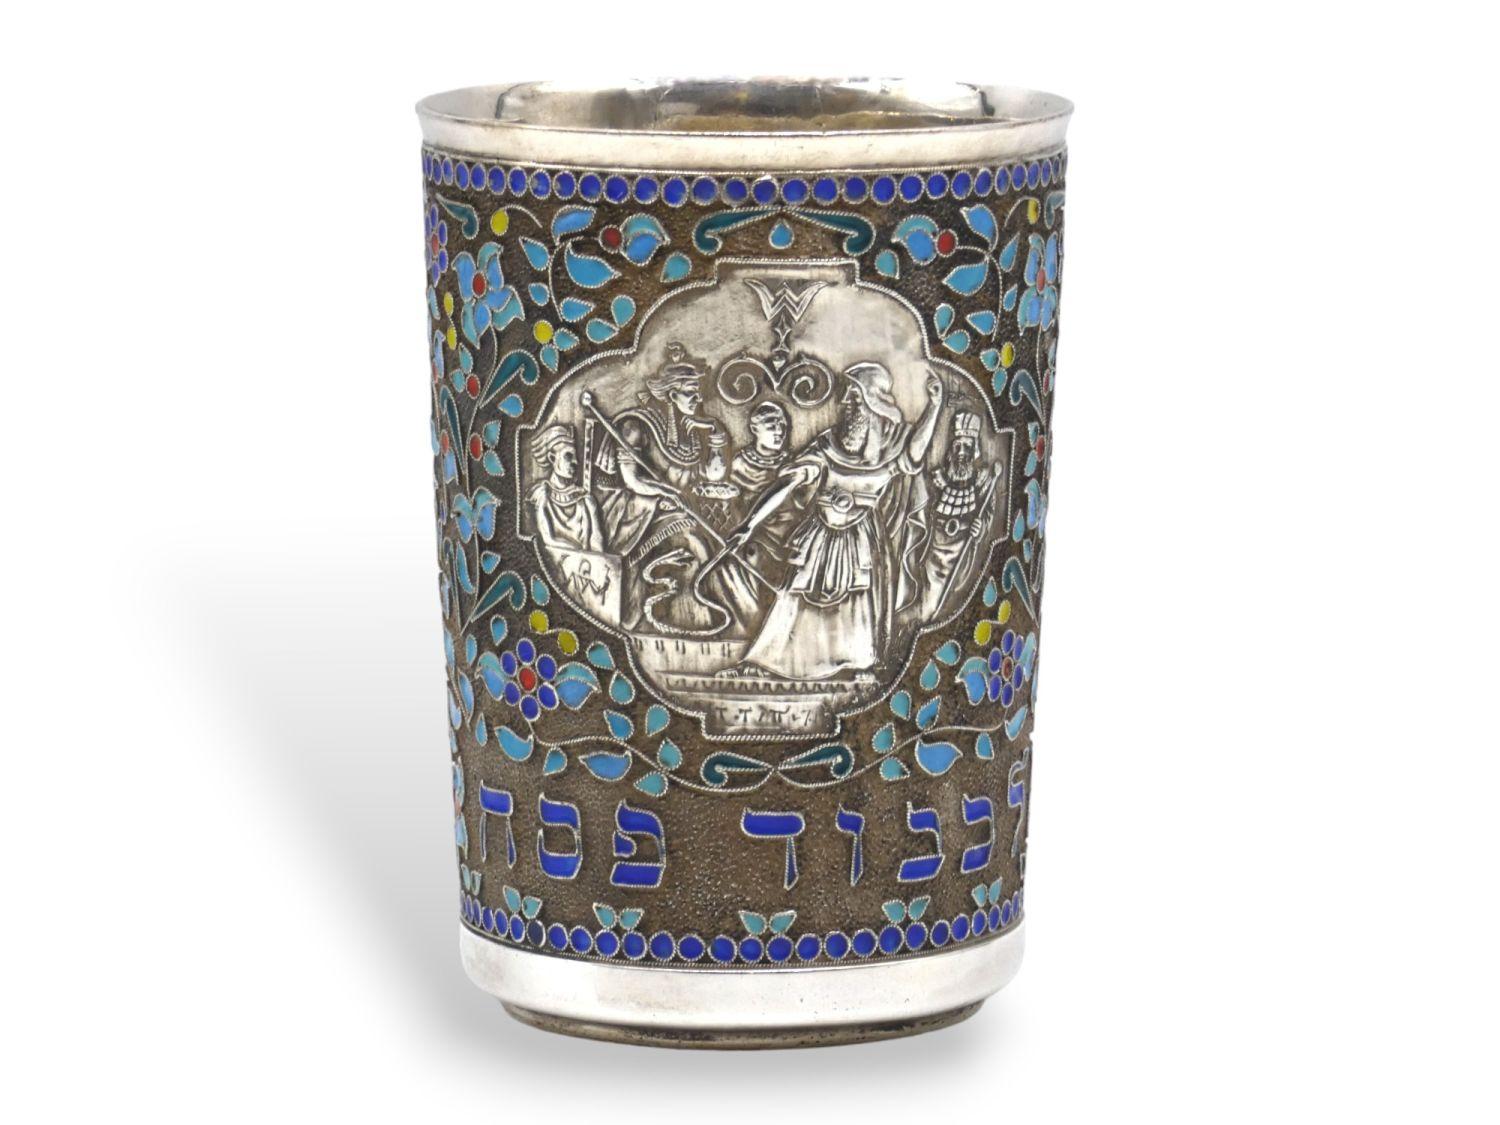 A Silver and Enamel Passover Kiddush Cup by Henryk Winograd, New York, 1995 For Sale 2